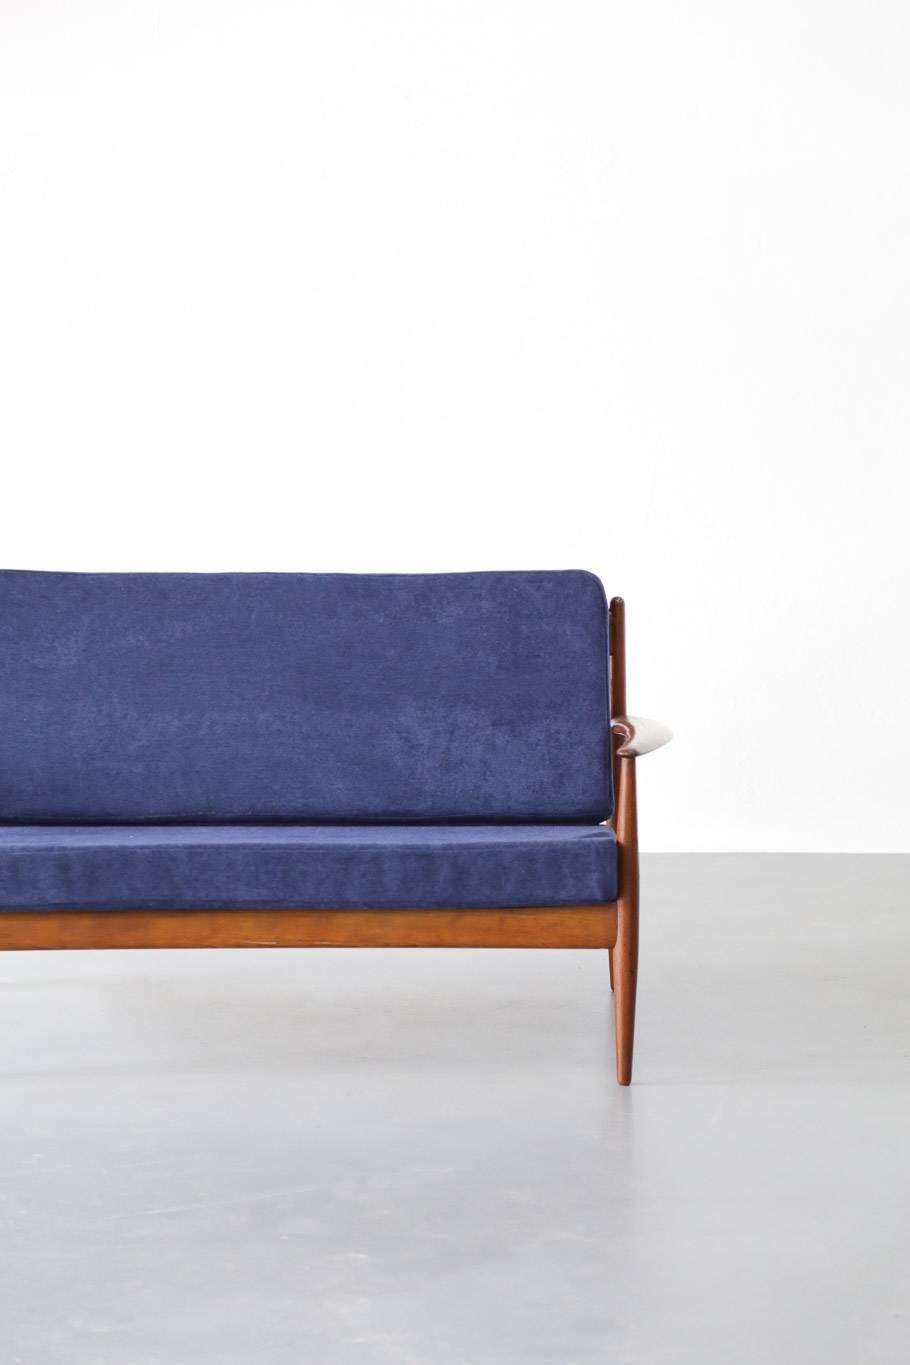 First edition for this sofa designed by Grete Jalk for France and Son.
Scandinavian sofa
Freshly reupholstered. Perfect condition.